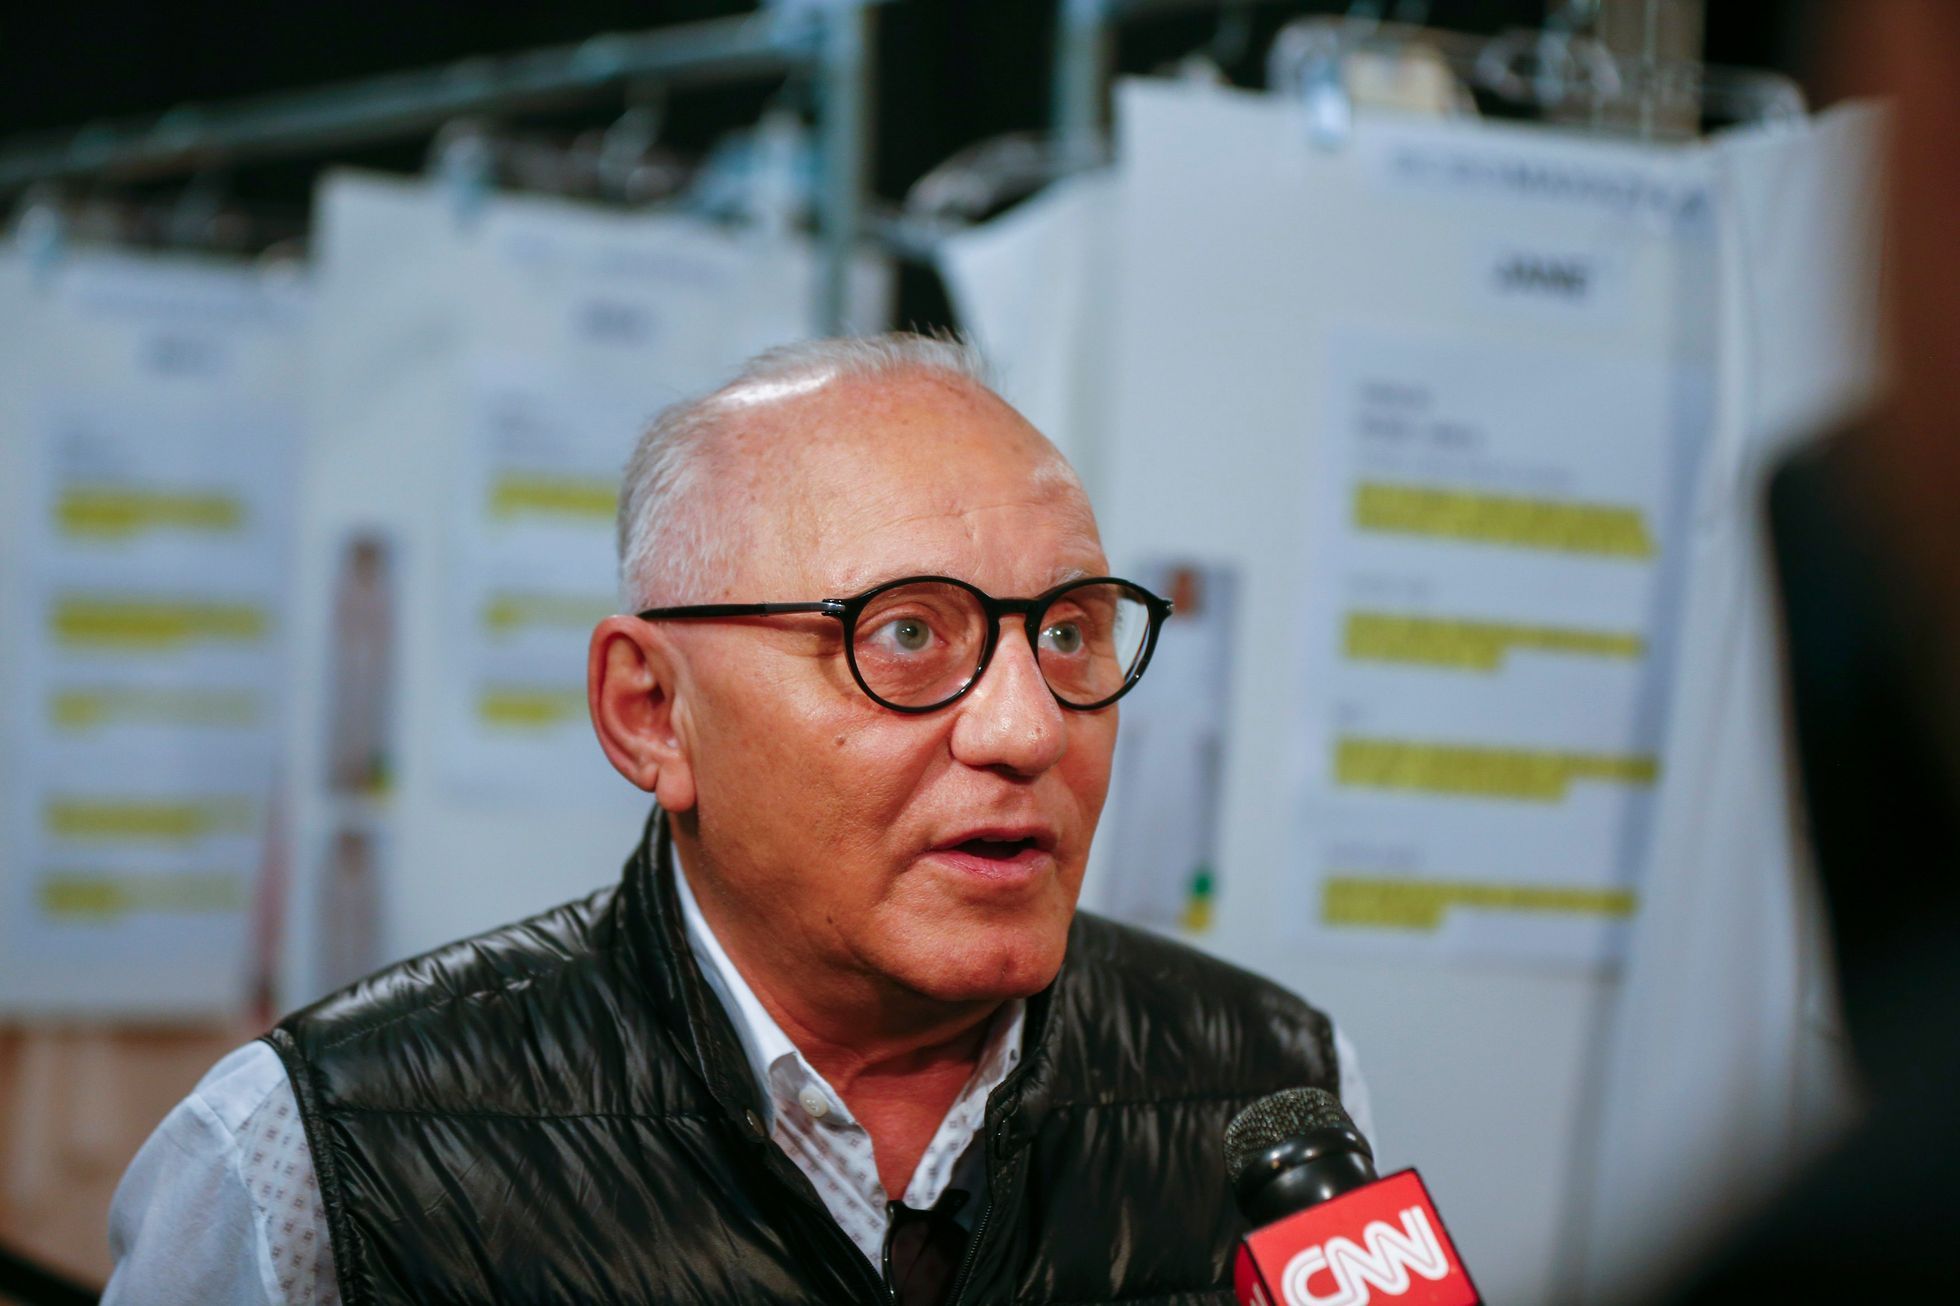 Designer Max Azria is interviewed backstage before showing the BCBG Max Azria collection during New York Fashion Week